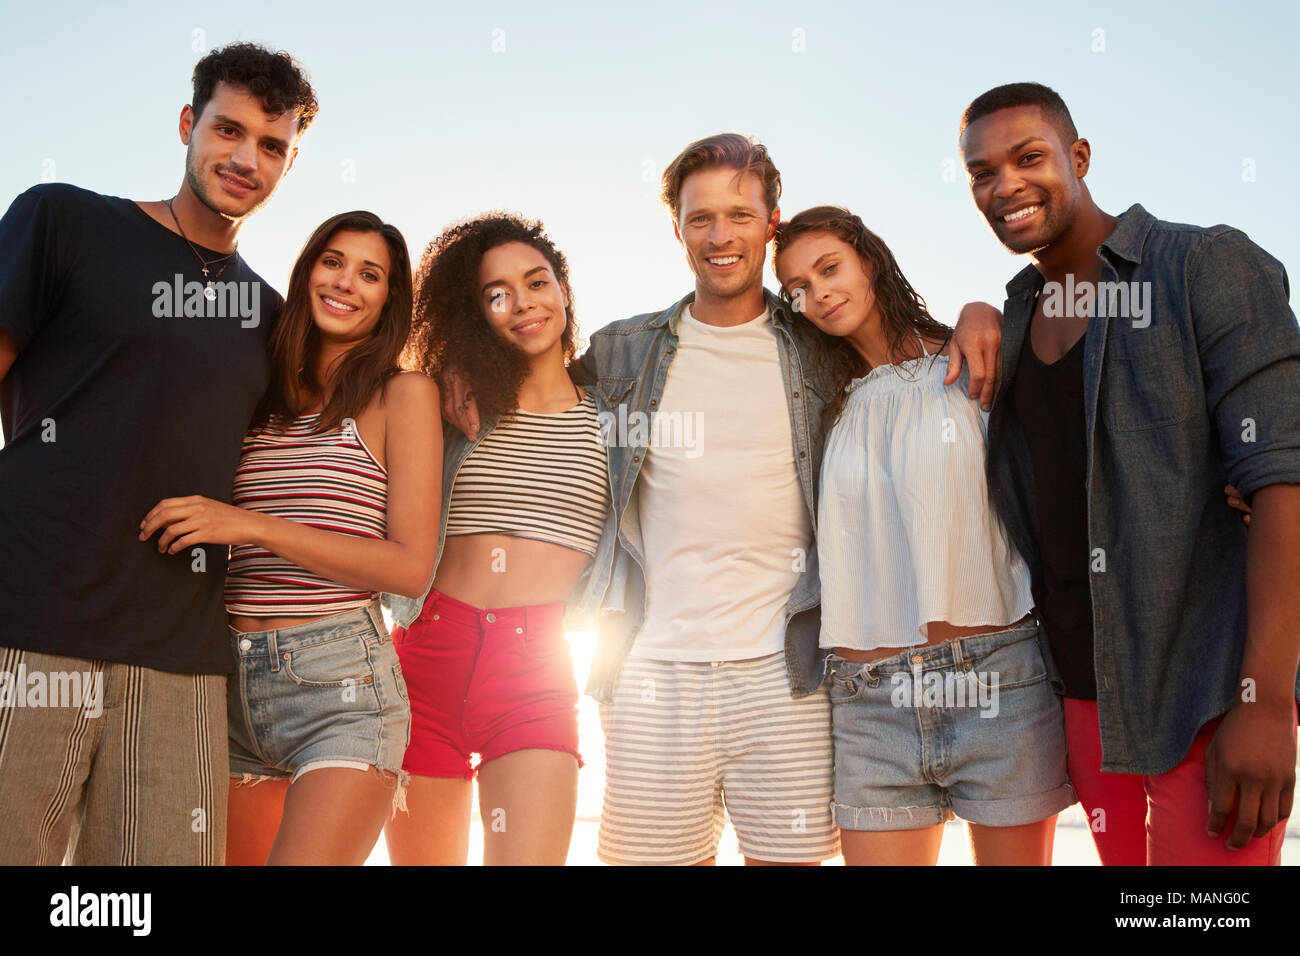 Portrait of Friends having fun Together On Beach Vacation Banque D'Images